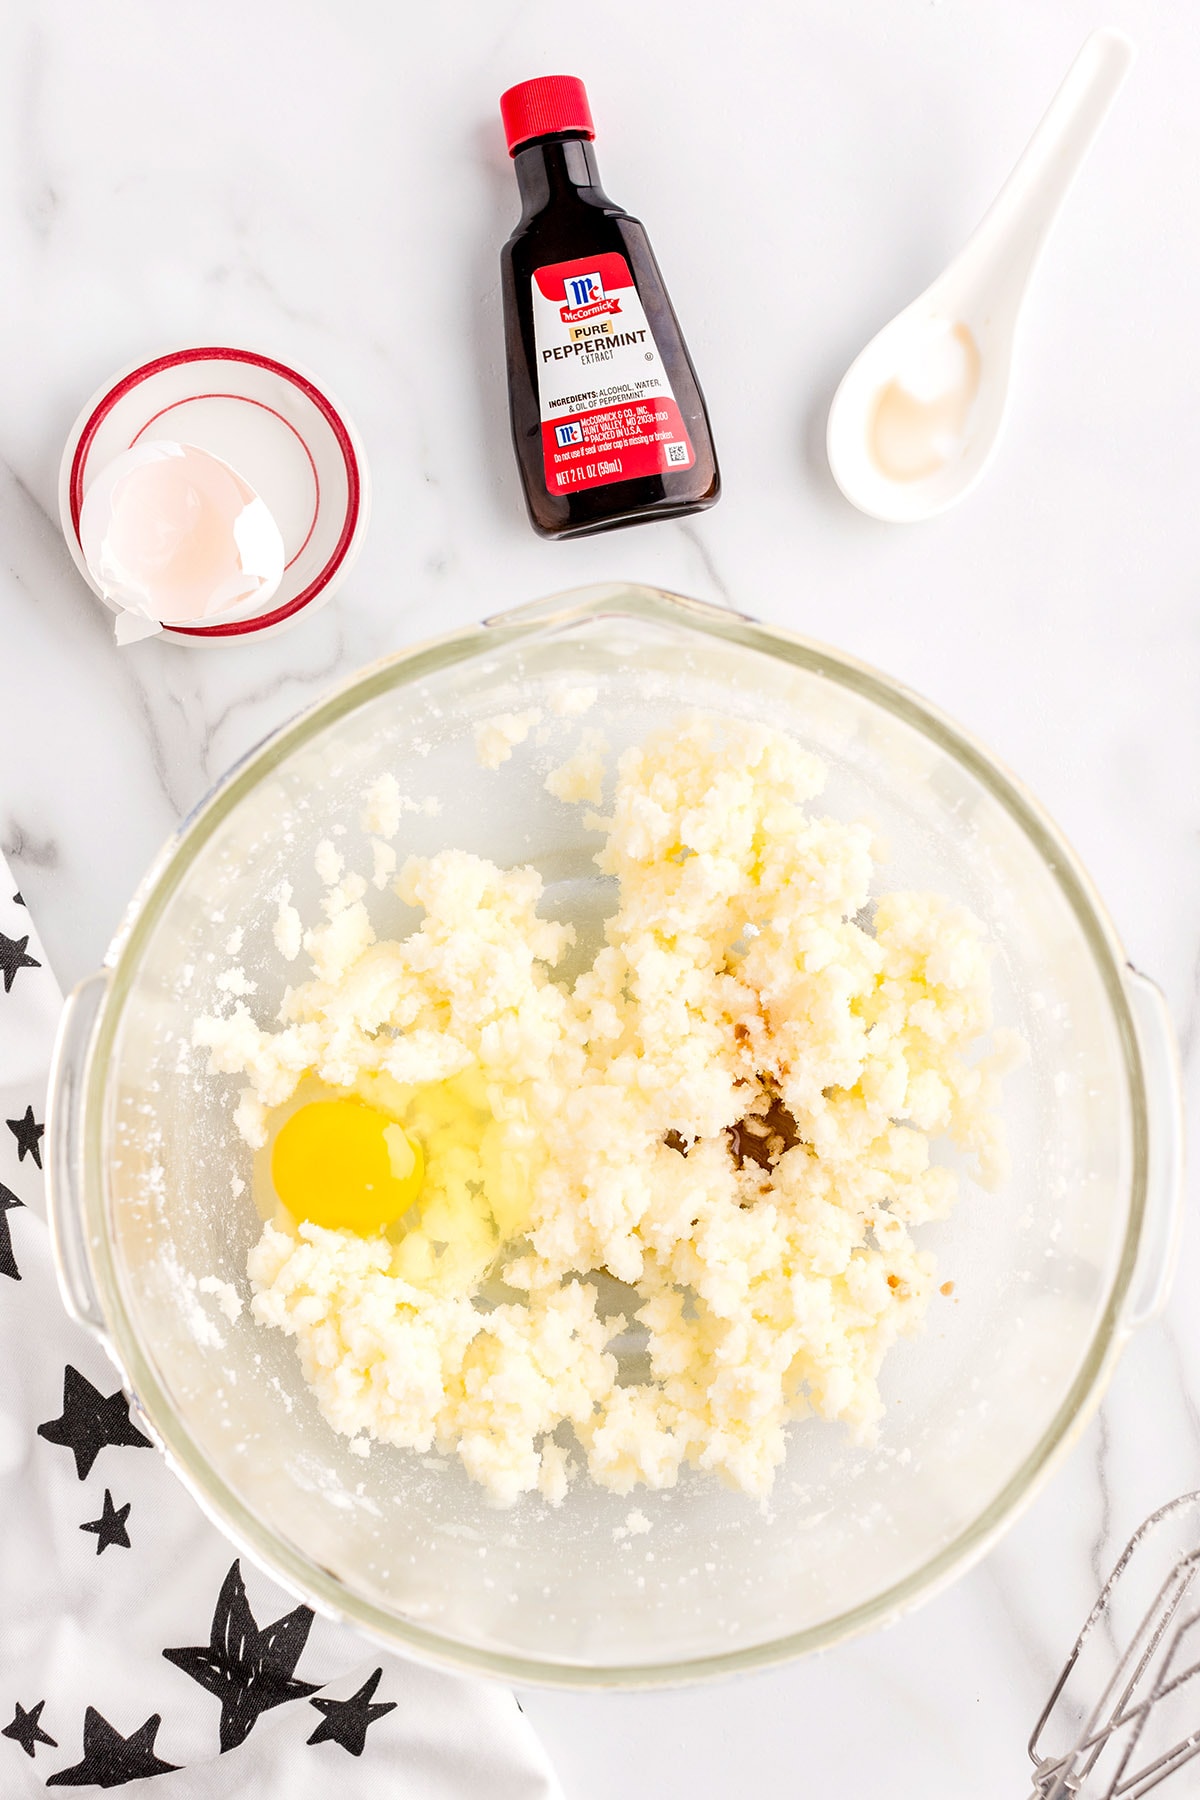 Beat together butter, sugar, egg, vanilla, and peppermint extract.